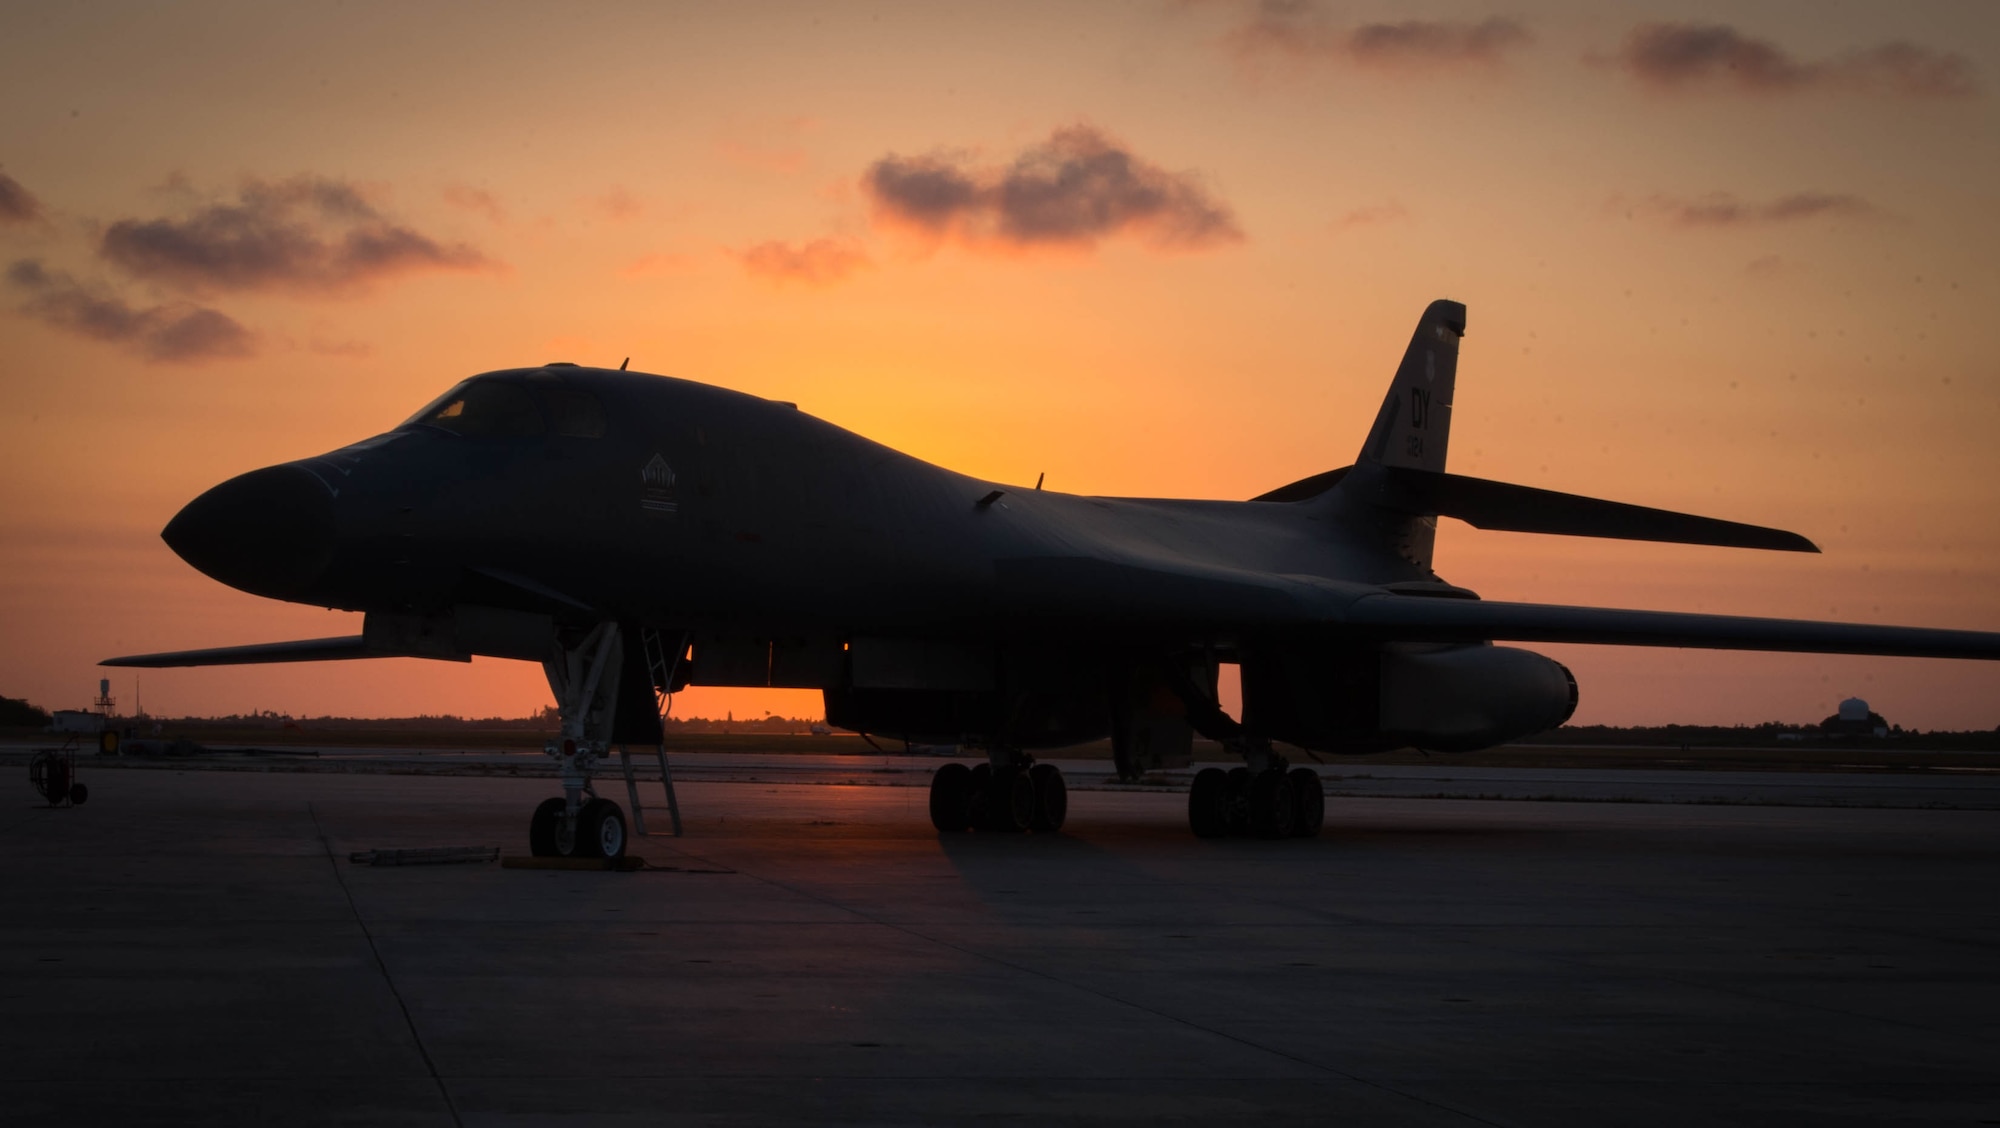 A B-1 Lancer waits for its aircrew at Boca Chica Field at Naval Air Station, Key West Fla., flightline for its role in the Joint Interagency Task Force South mission March 23, 2017. Airmen from the 489th Bombardment Group and the 7th Bomb Wing supported the Drug Enforcement Agency, FBI, Coast Guard and other government agencies in the fight against illicit drugs. (U.S. Air Force photo by Staff Sgt. Jason McCasland/released)